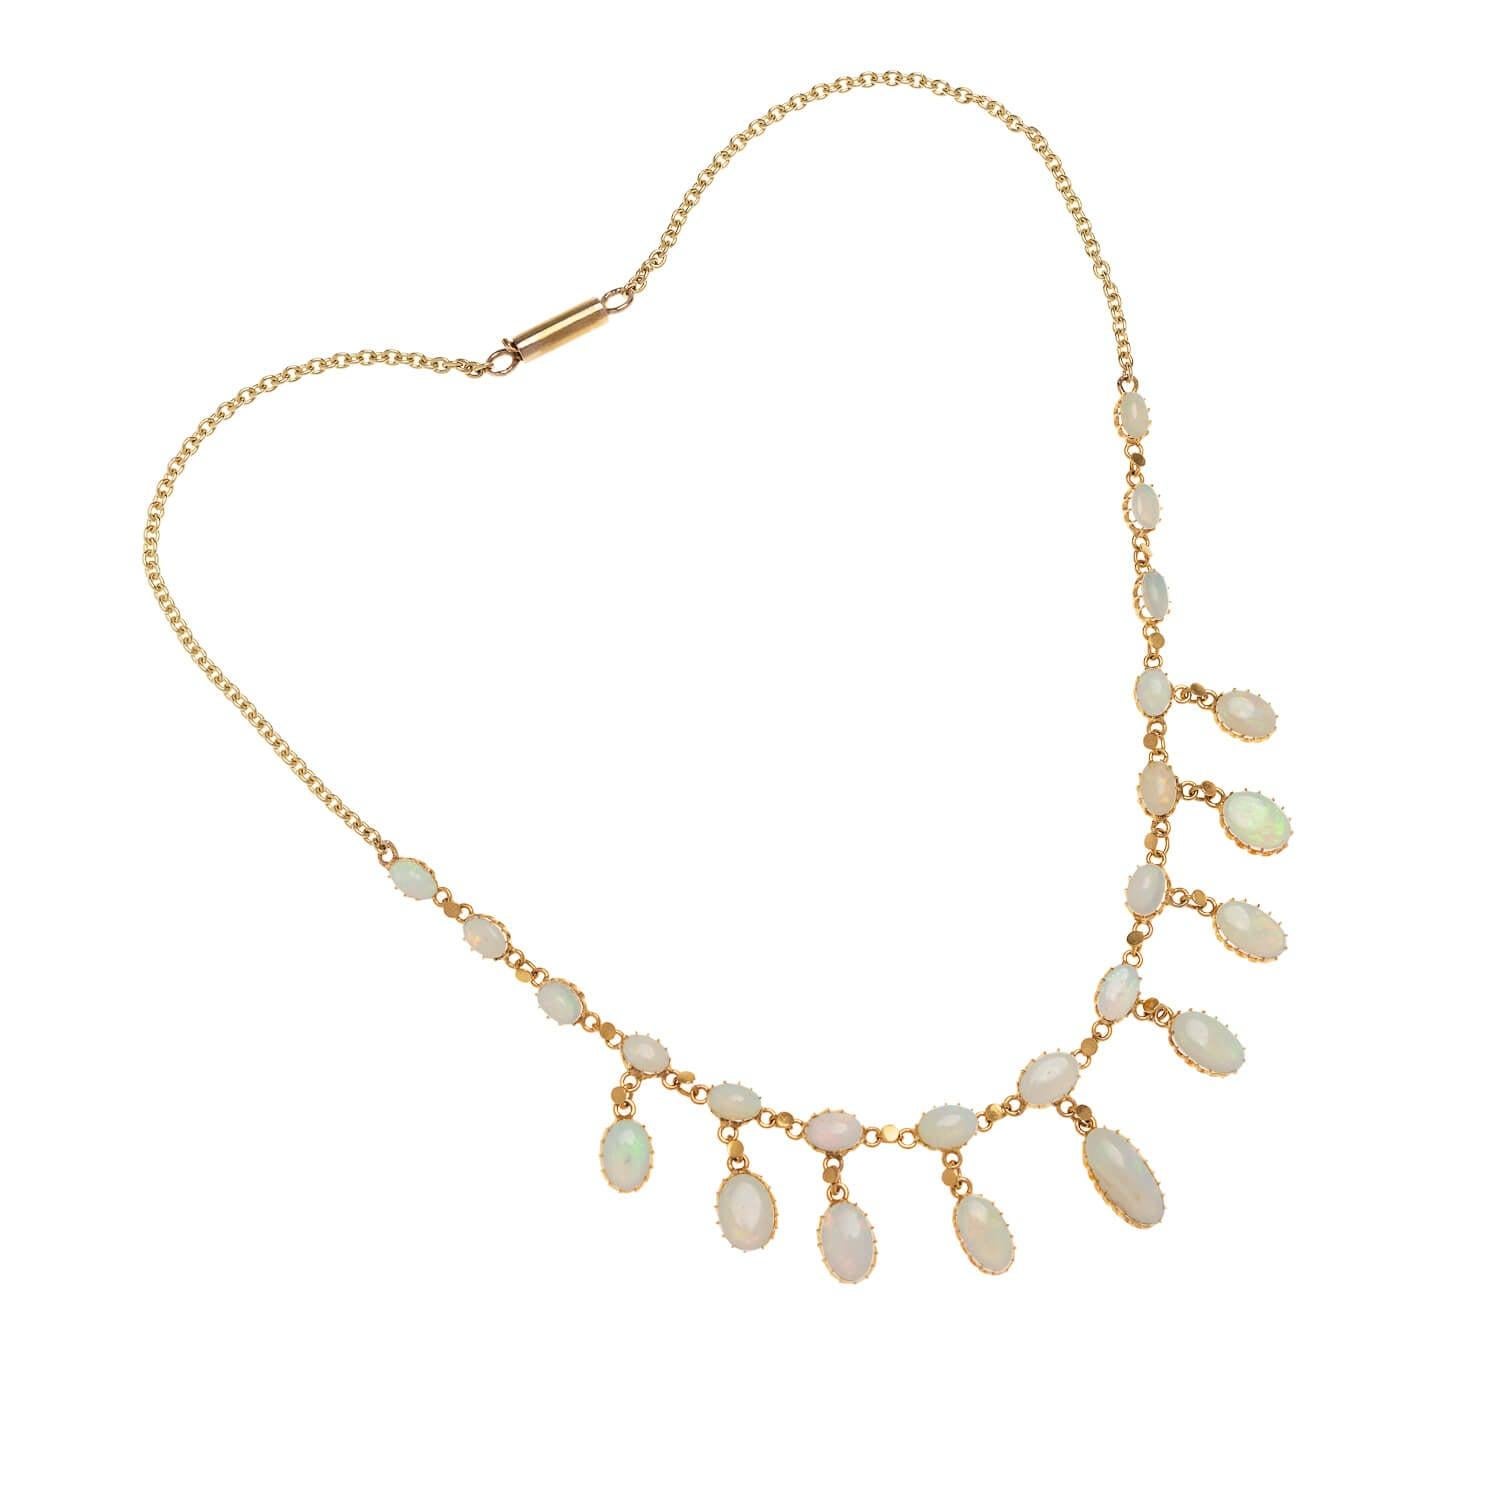 A stunning necklace from the Late Victorian (ca1900s) era! Crafted in 18kt yellow gold, this gorgeous riviere festoon necklace features 24 incredible Australian Opal cabochons. The opals display an incredible range of rainbow hues, flashing with